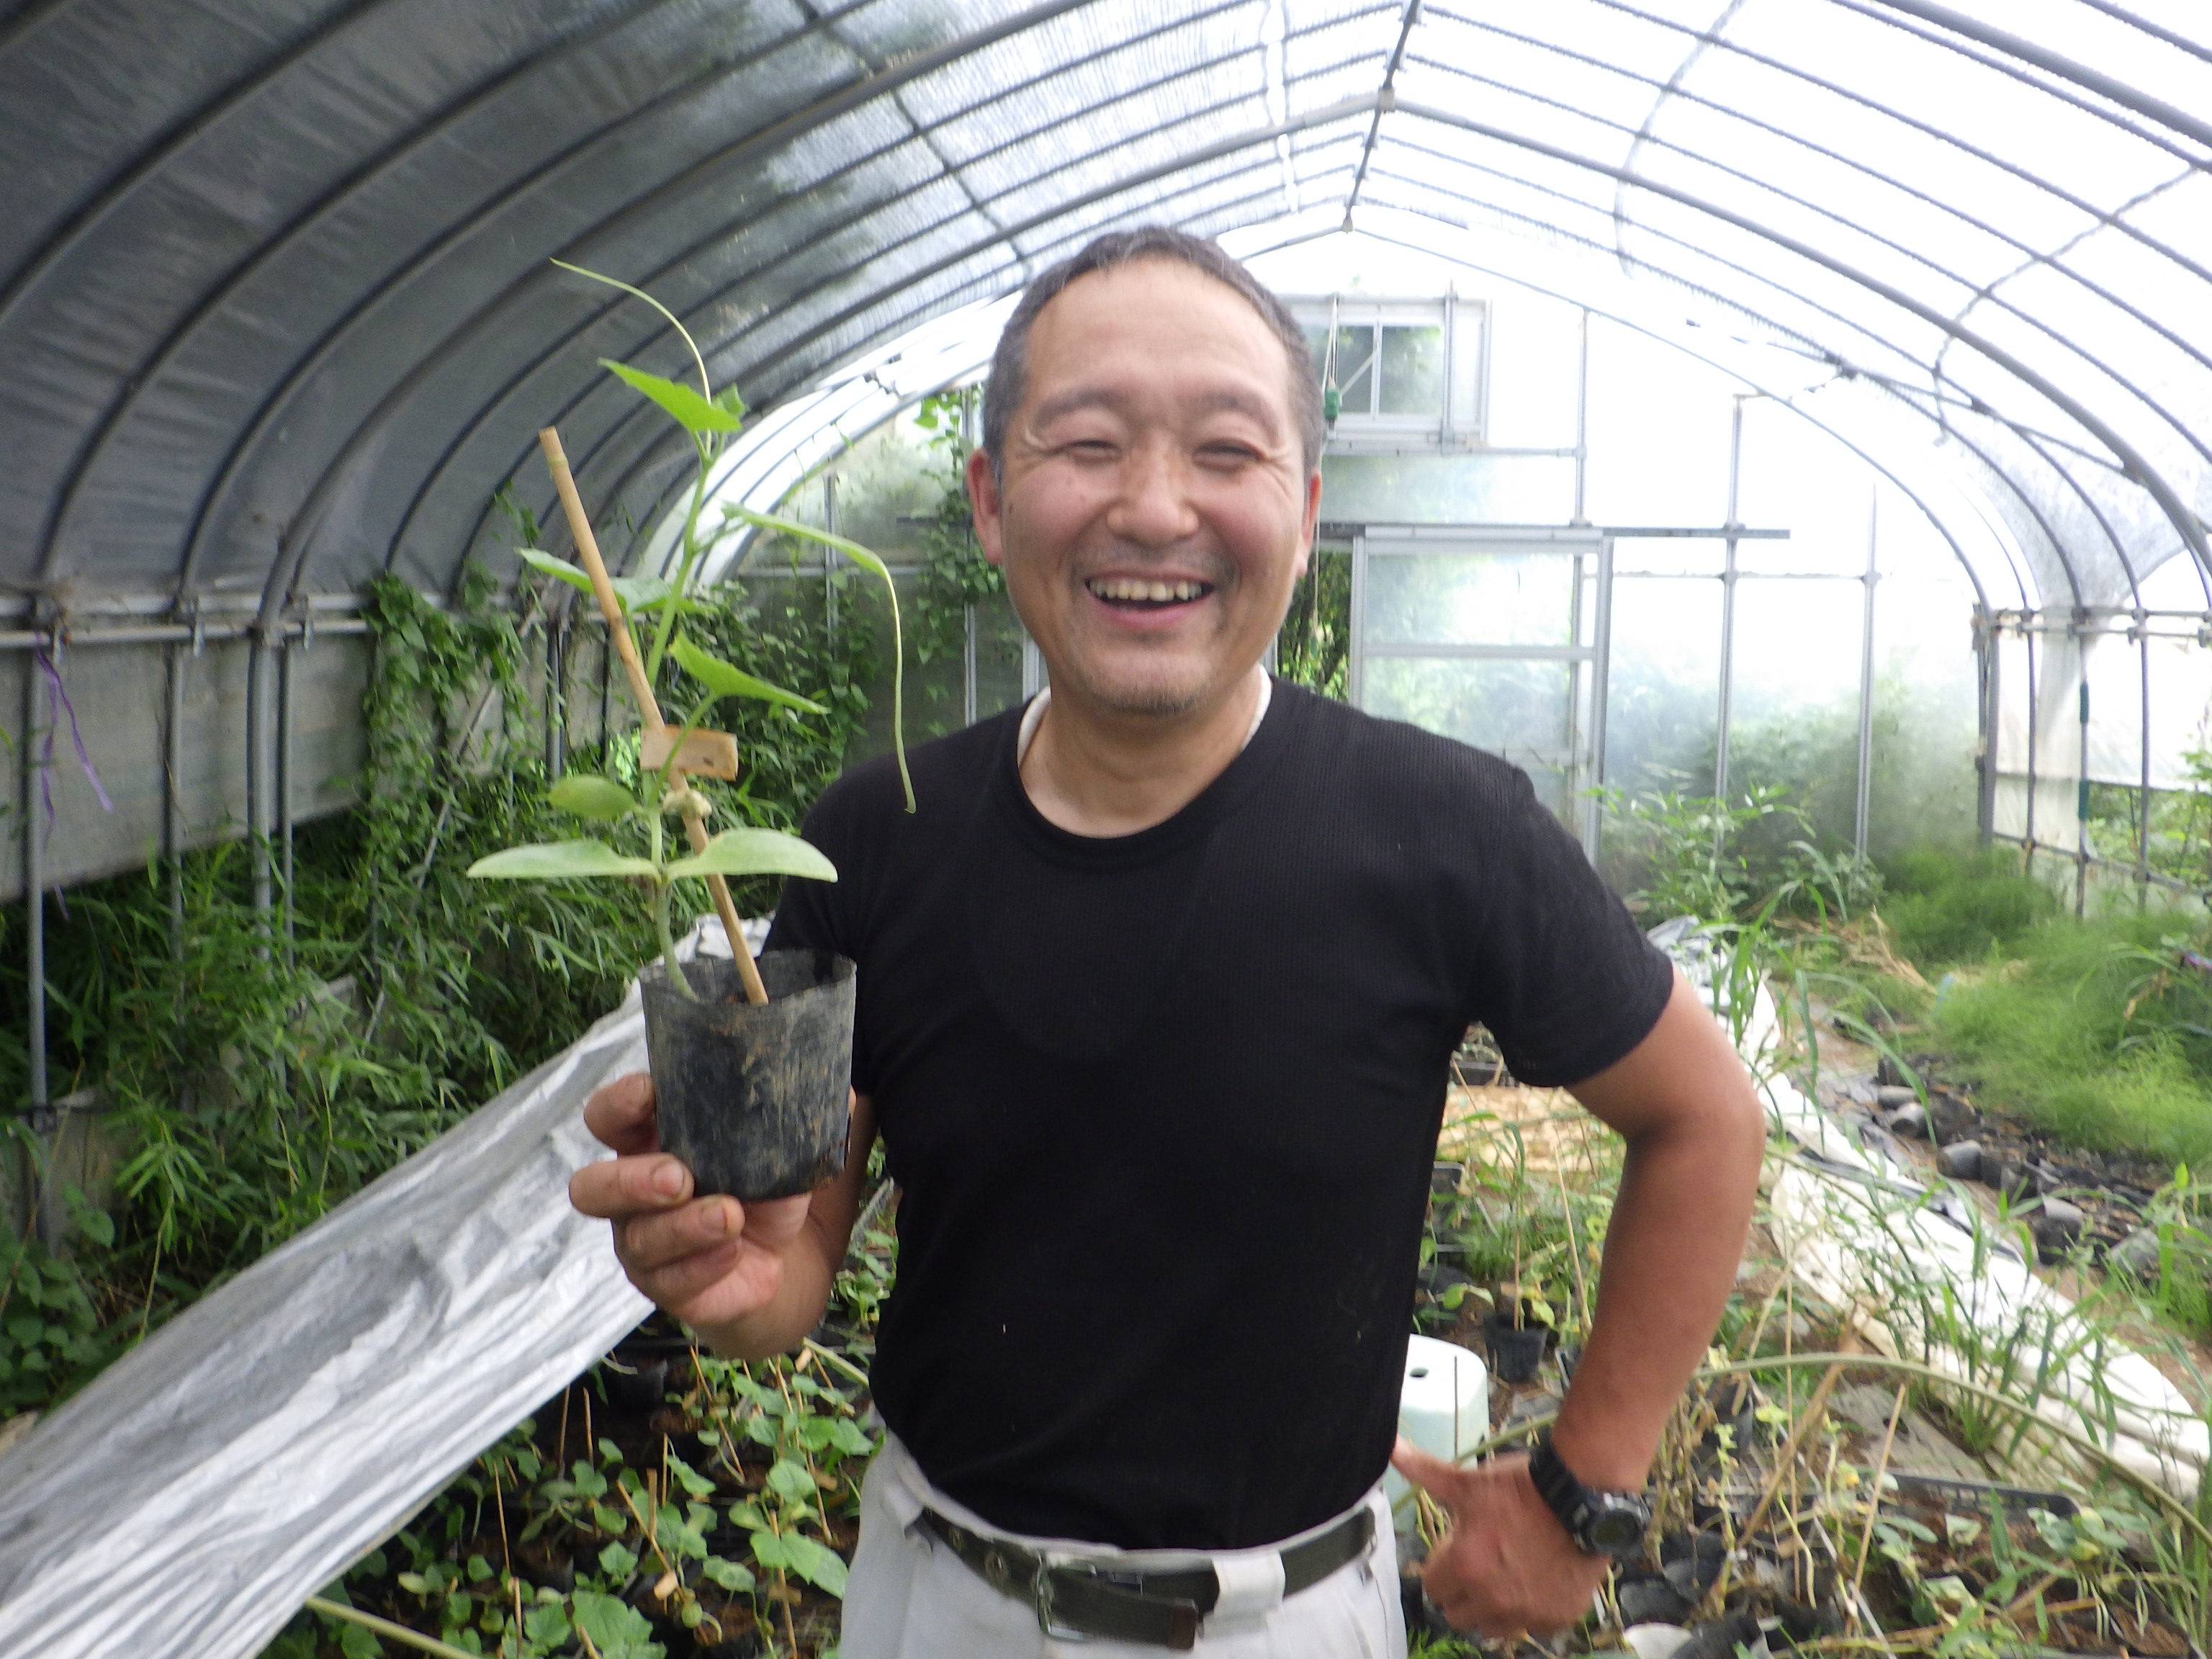 Case Study: A Cucumber Farm Quickly Recovered After the Nuclear Plant Accident in Fukushima